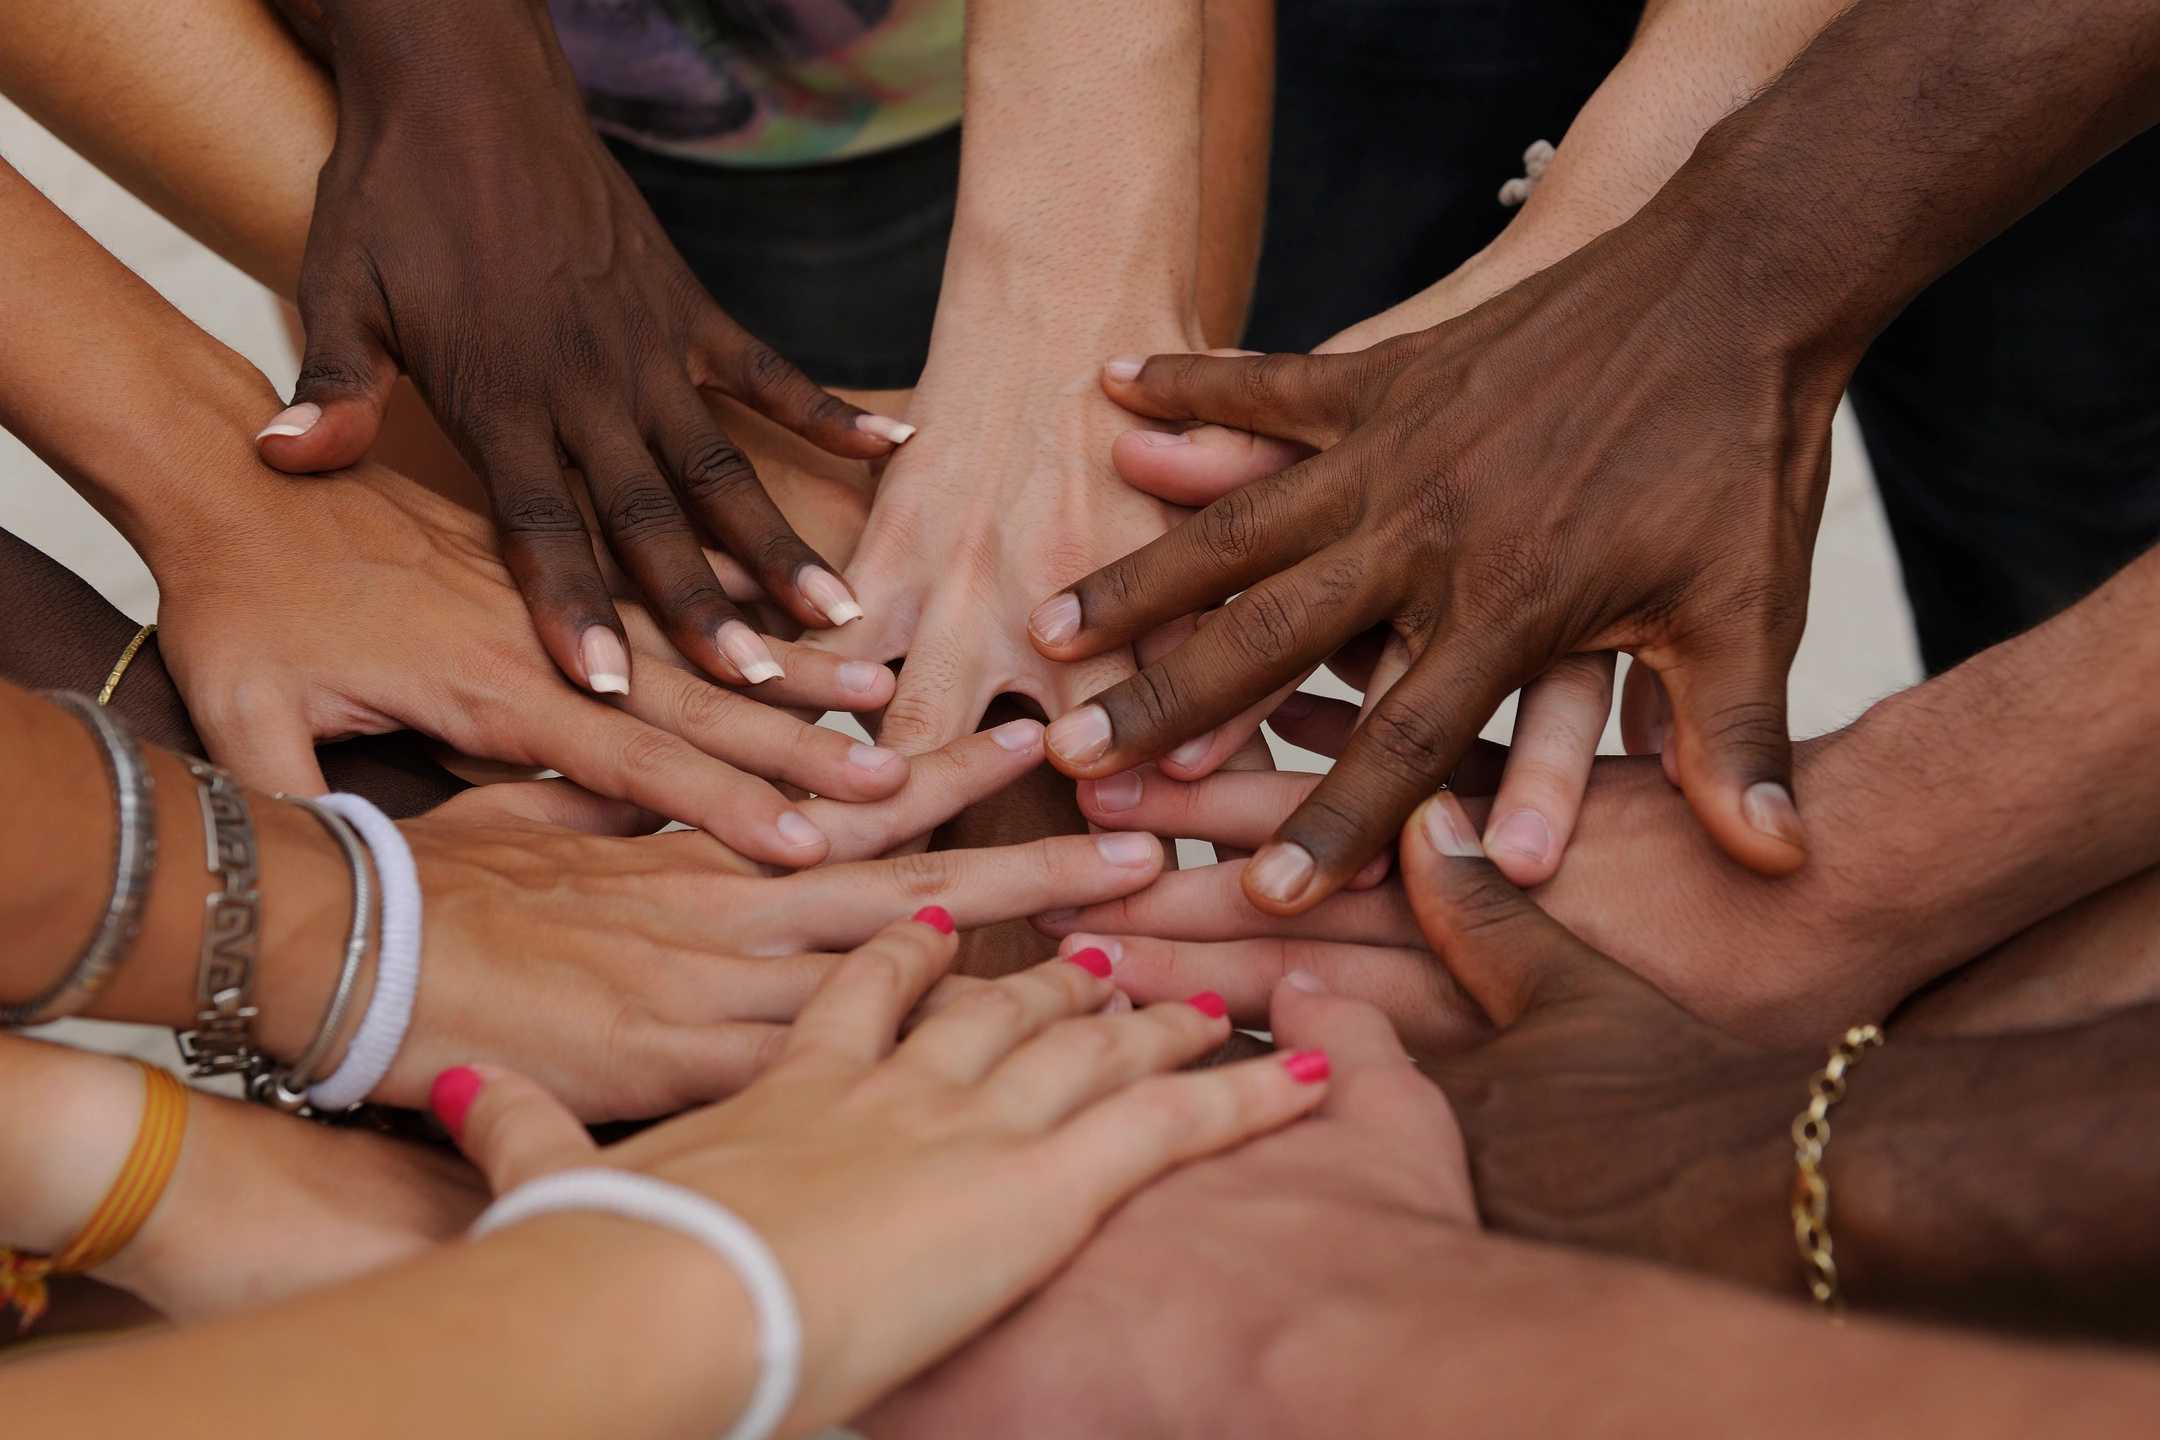 A group of people putting hands together